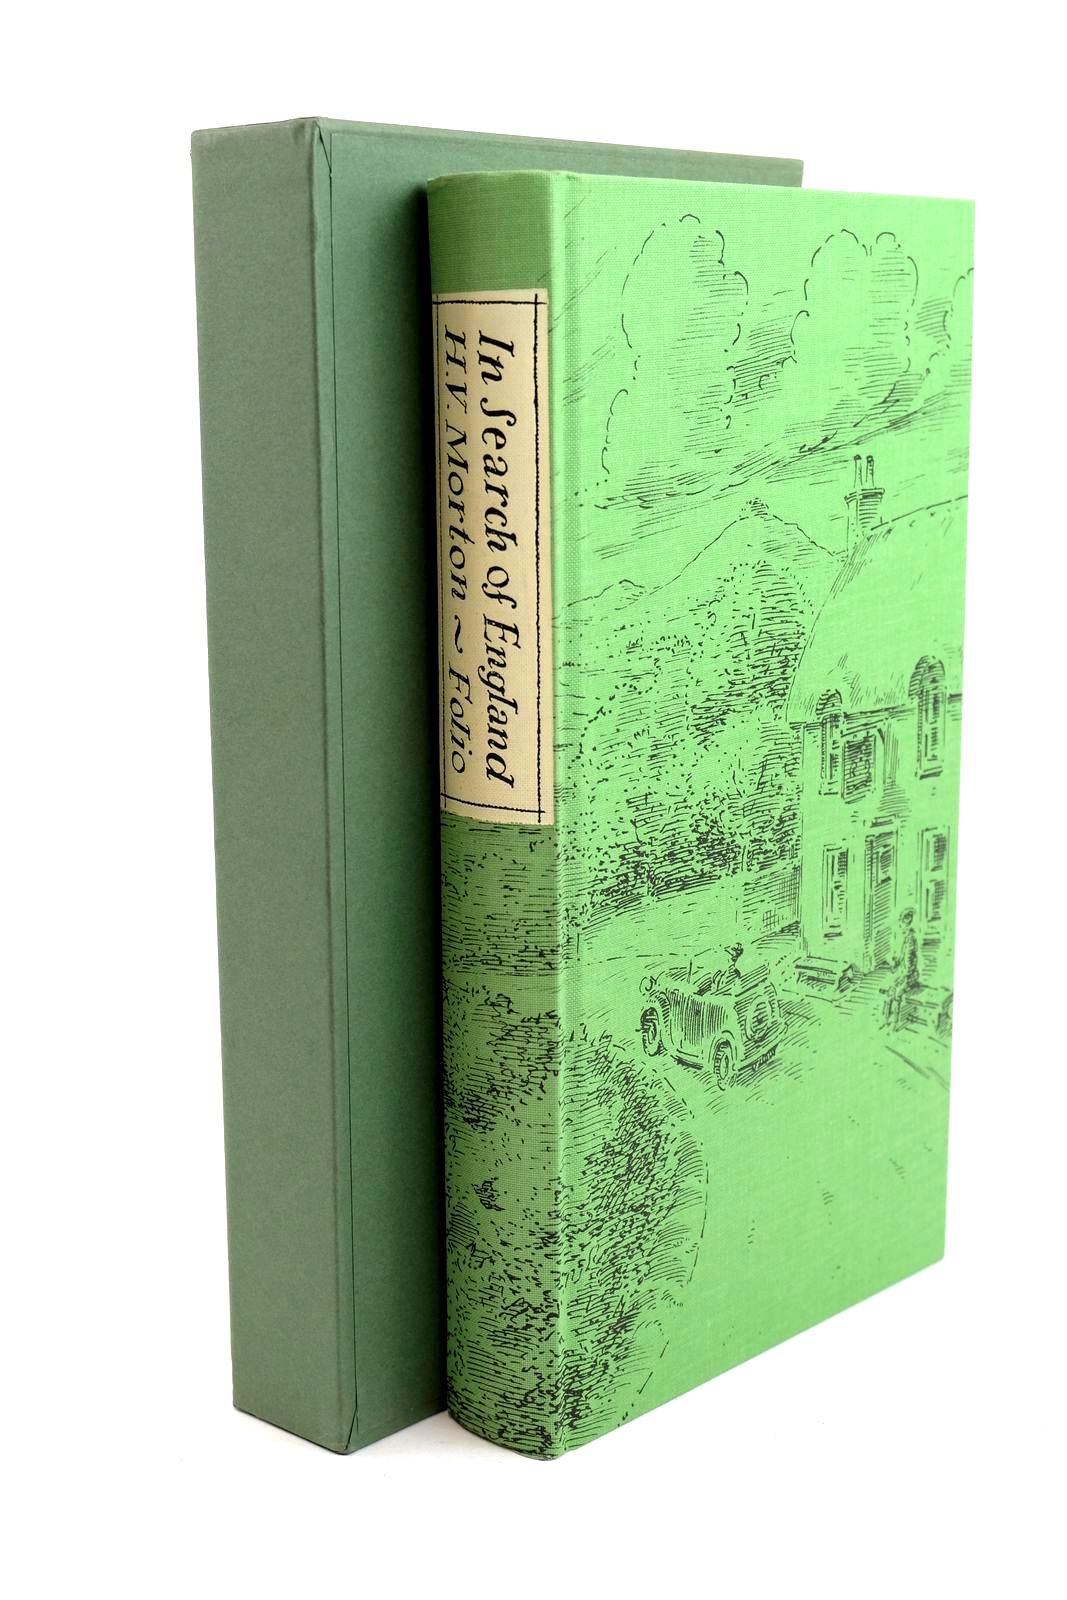 Photo of IN SEARCH OF ENGLAND written by Morton, H.V.
Jenkins, Simon illustrated by Bailey, Peter published by Folio Society (STOCK CODE: 1320401)  for sale by Stella & Rose's Books